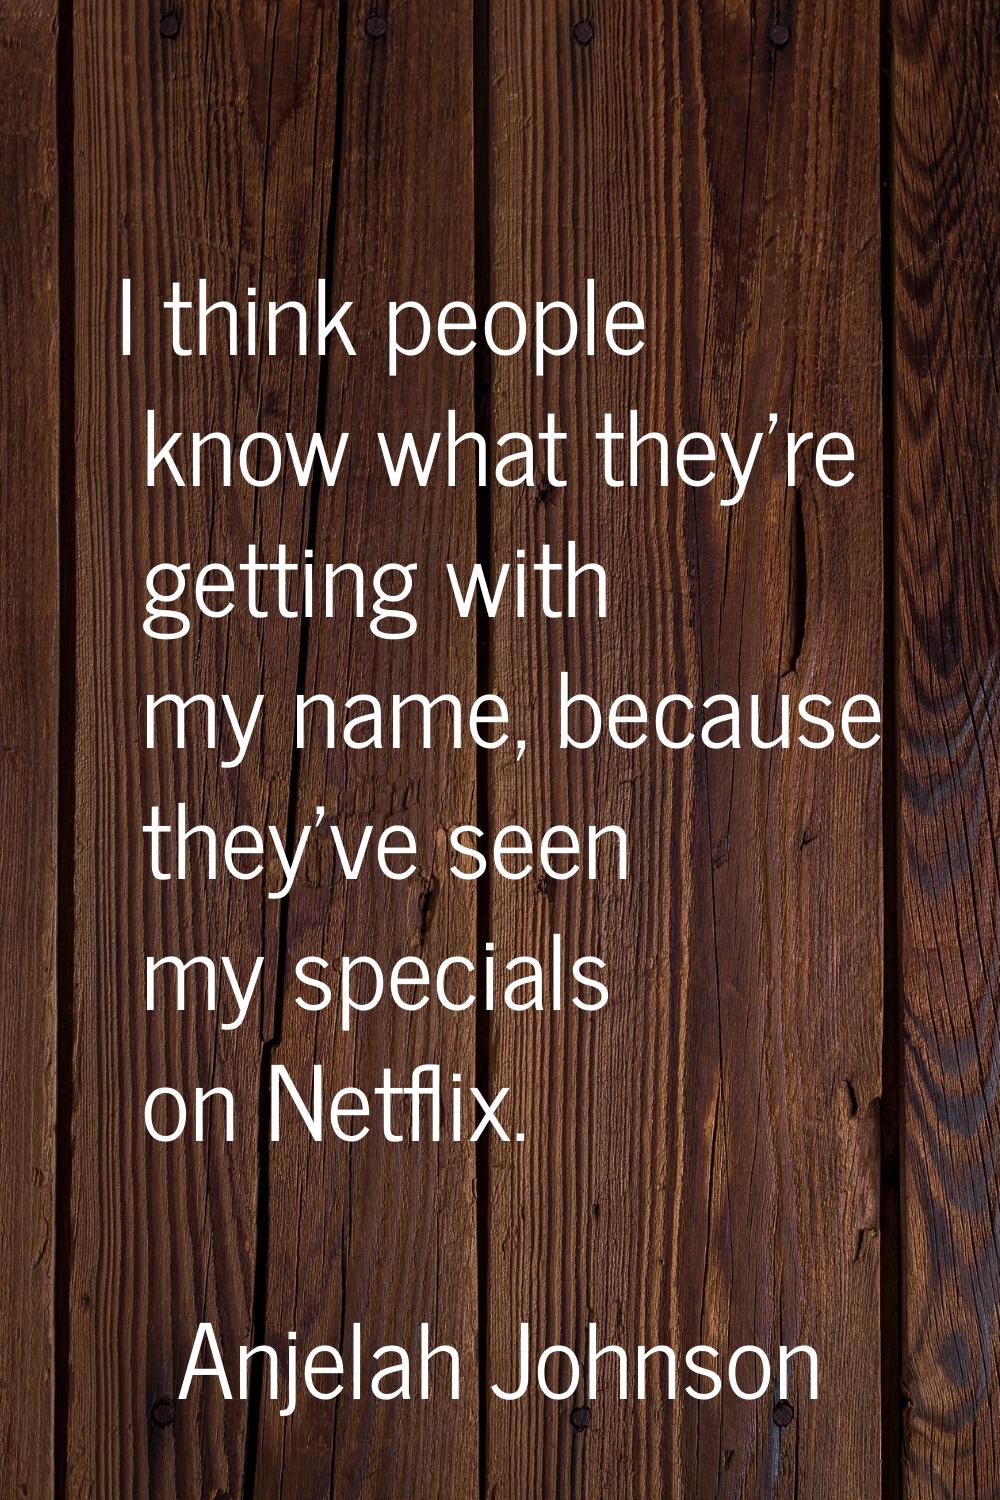 I think people know what they're getting with my name, because they've seen my specials on Netflix.